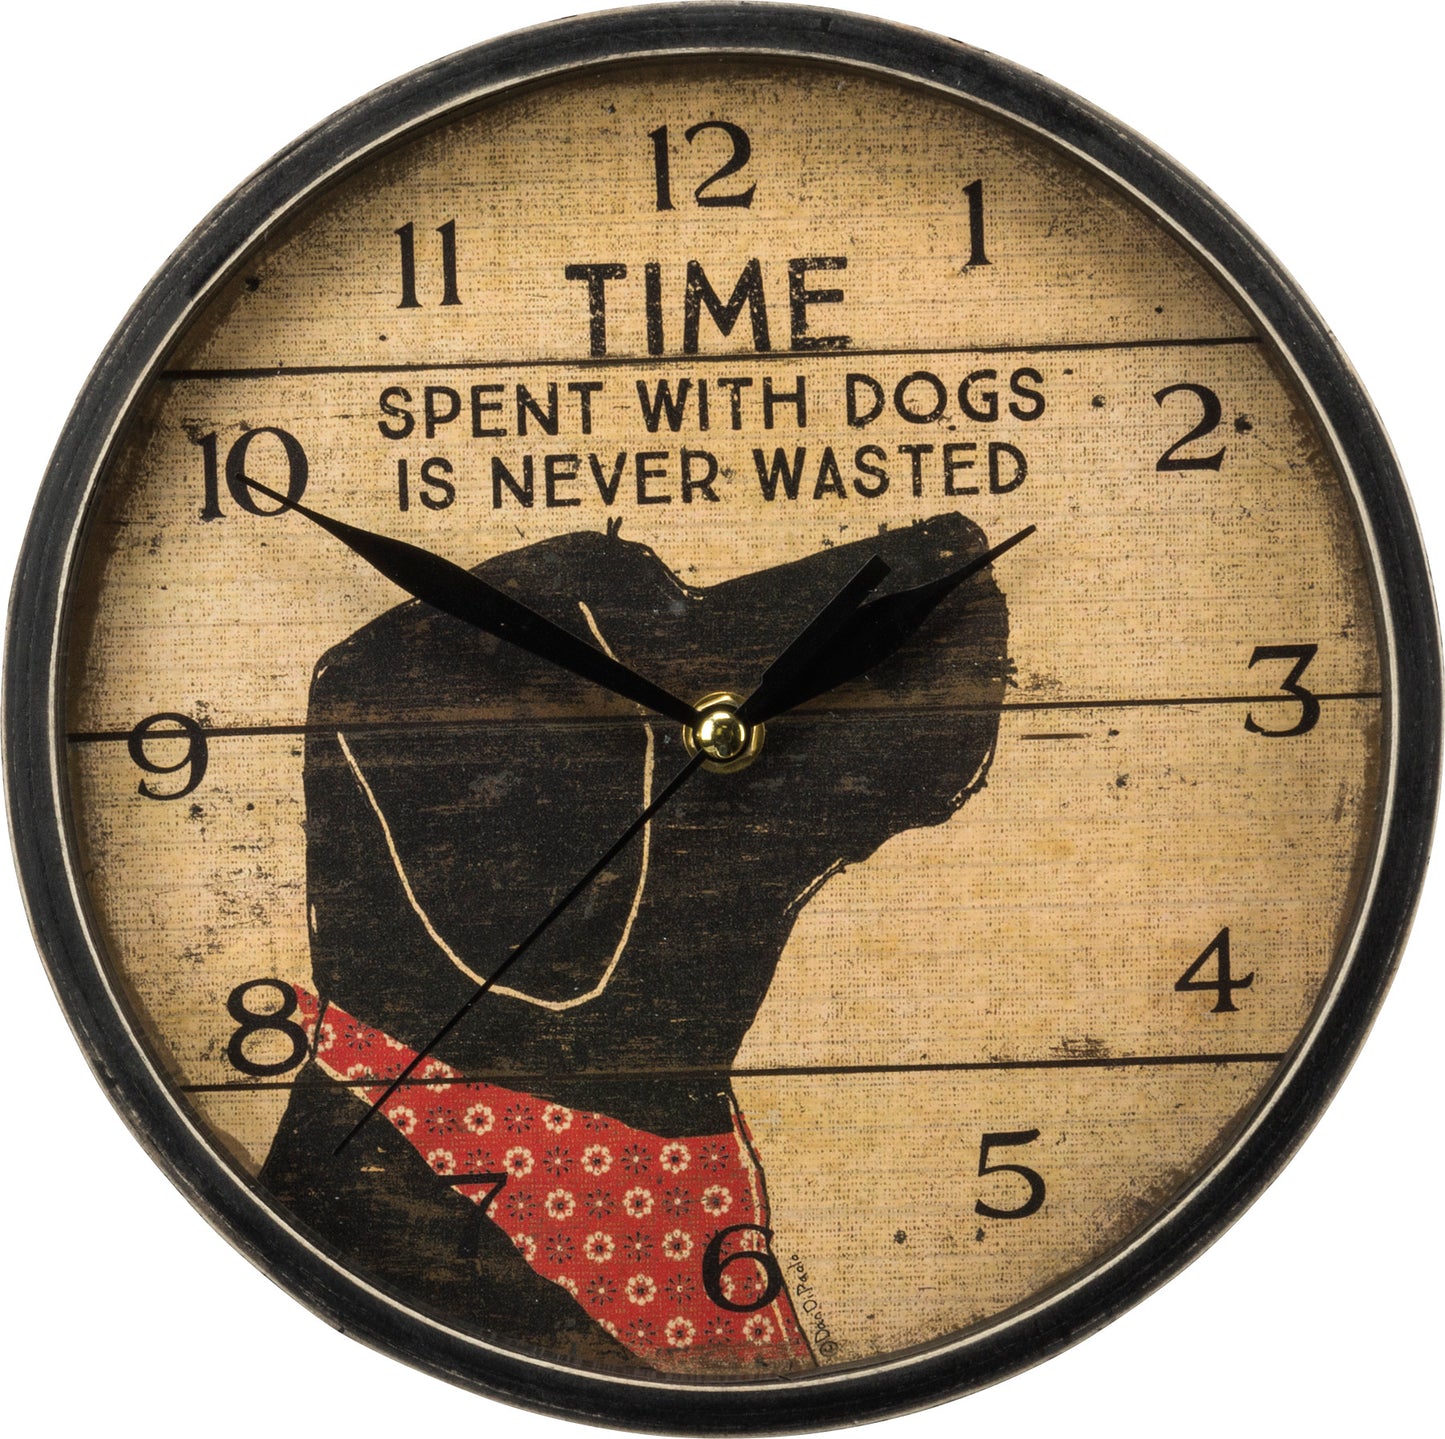 Clock-Time Spent With Dogs